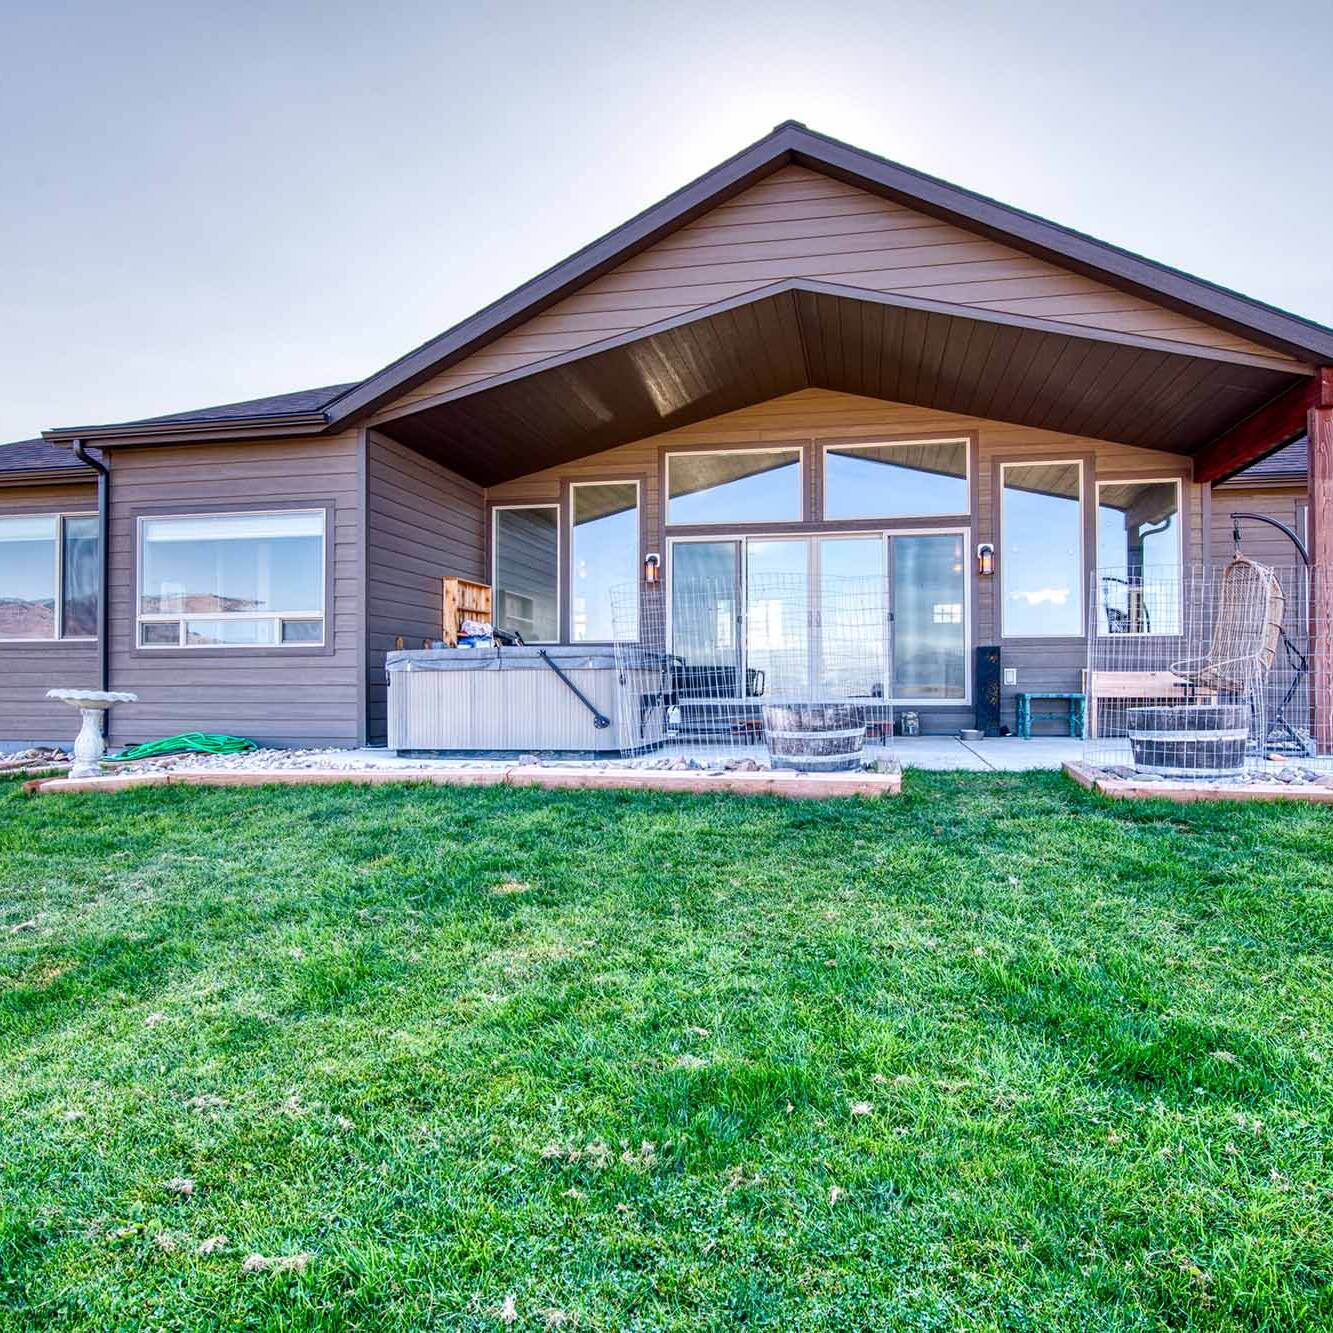 House exterior of The Copper Creek model home - Built by Big Sky Builder in Florence, MT